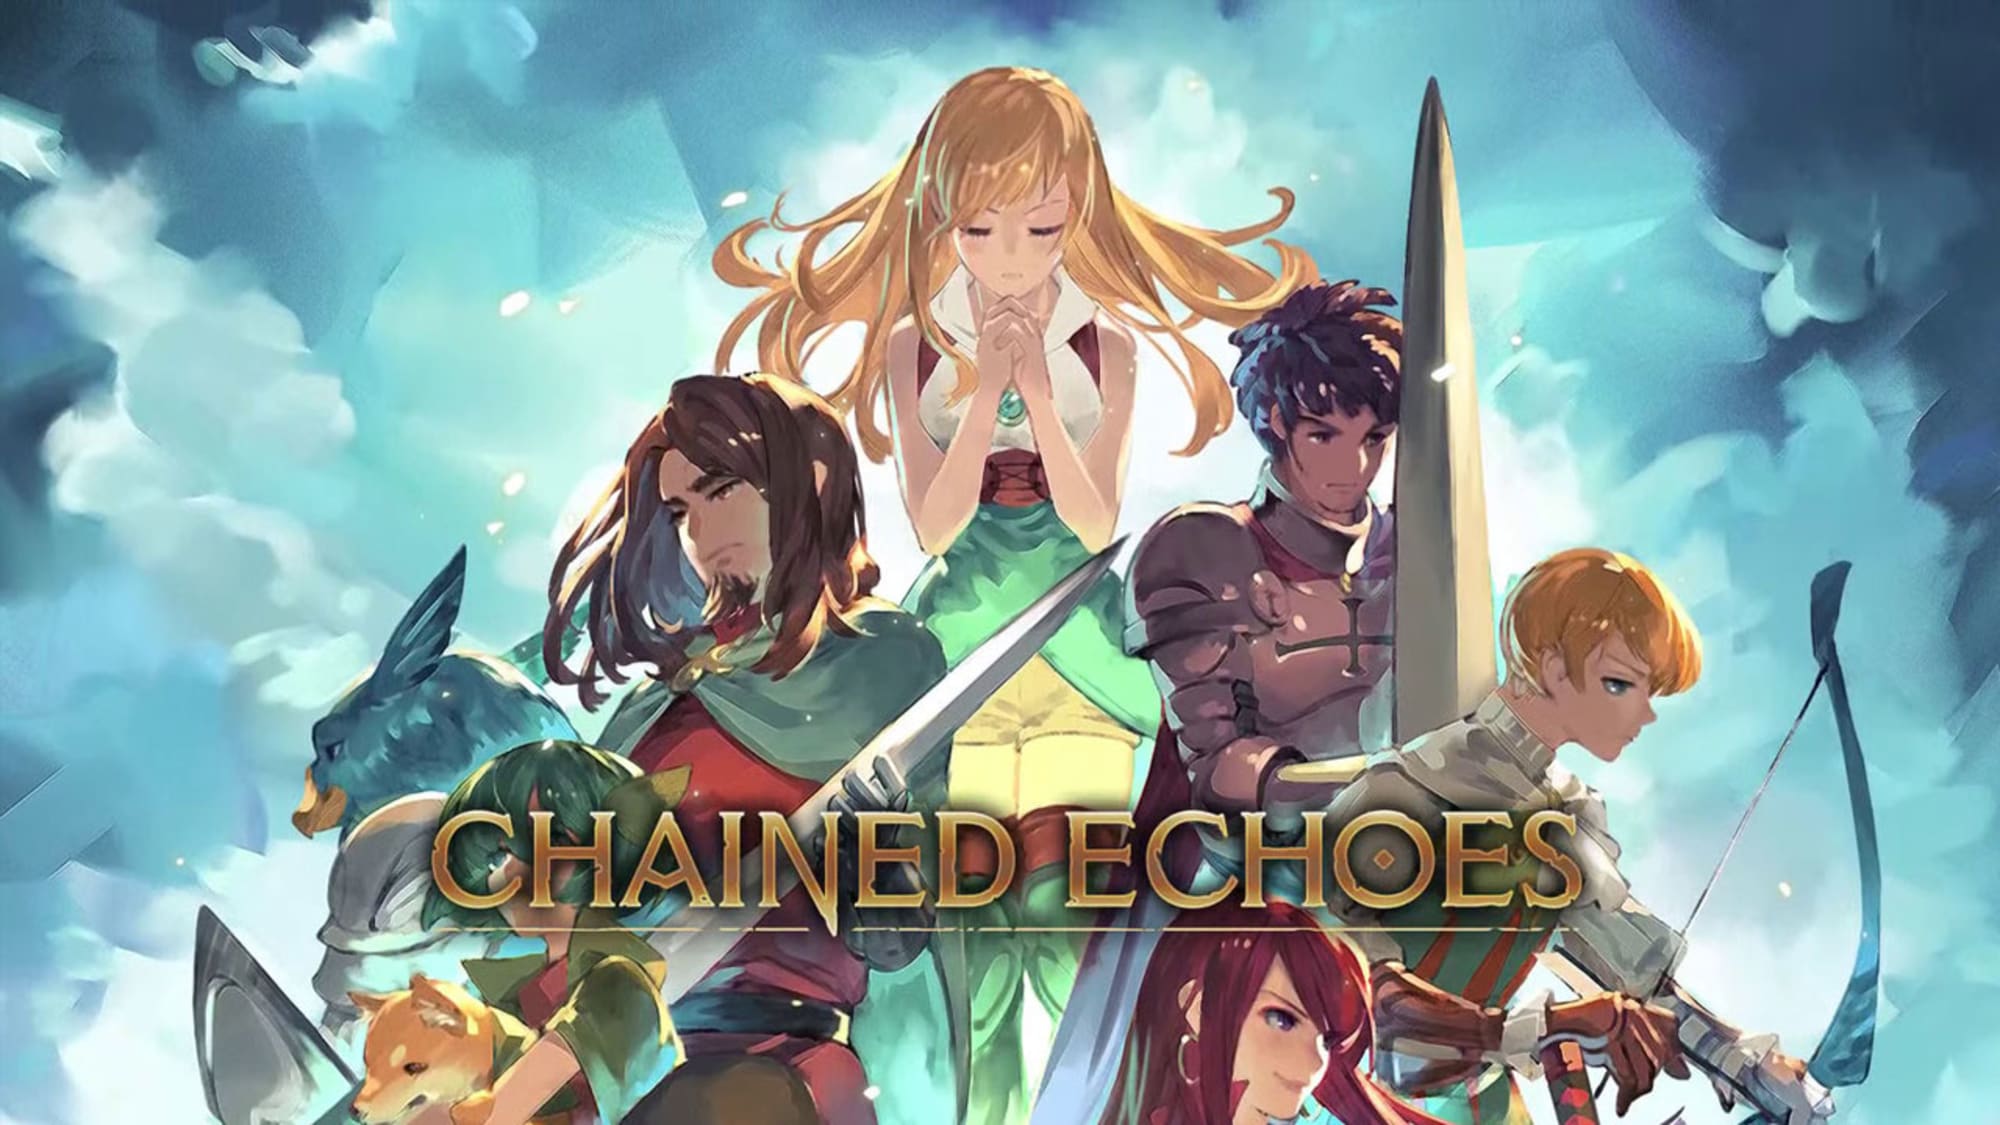 Chained Echoes Walkthrough / Guide